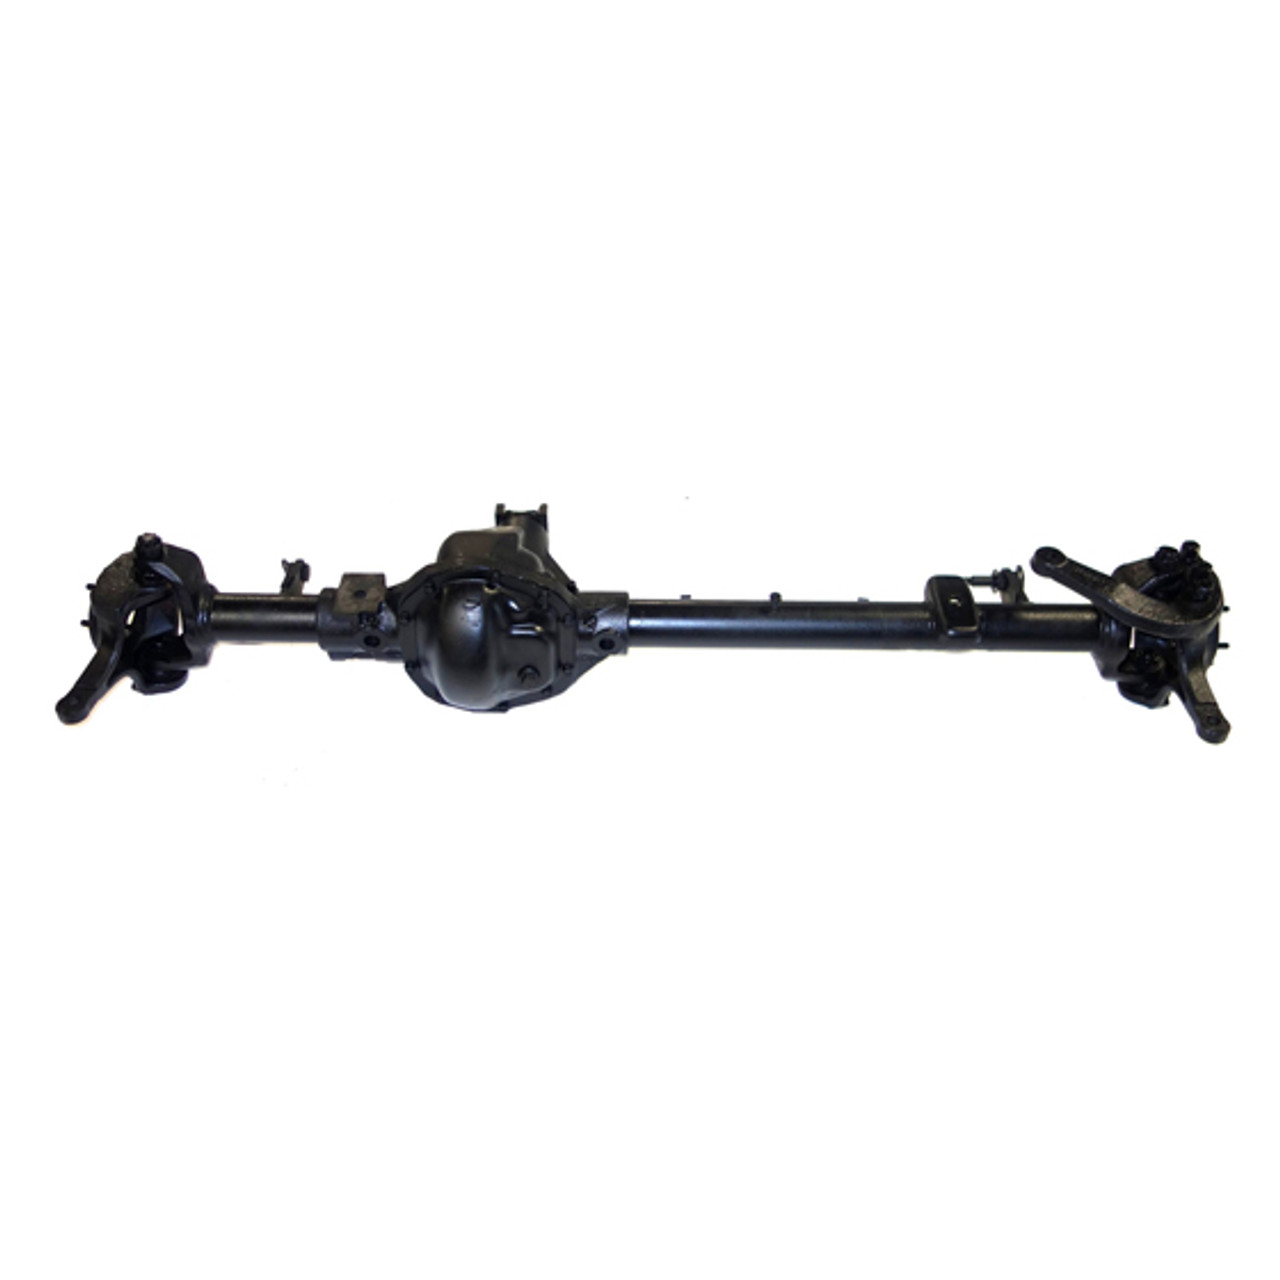 Reman Complete Axle Assembly for Dana 44 1998 Dodge Ram 1500 3.54 Ratio with 4 Wheel ABS